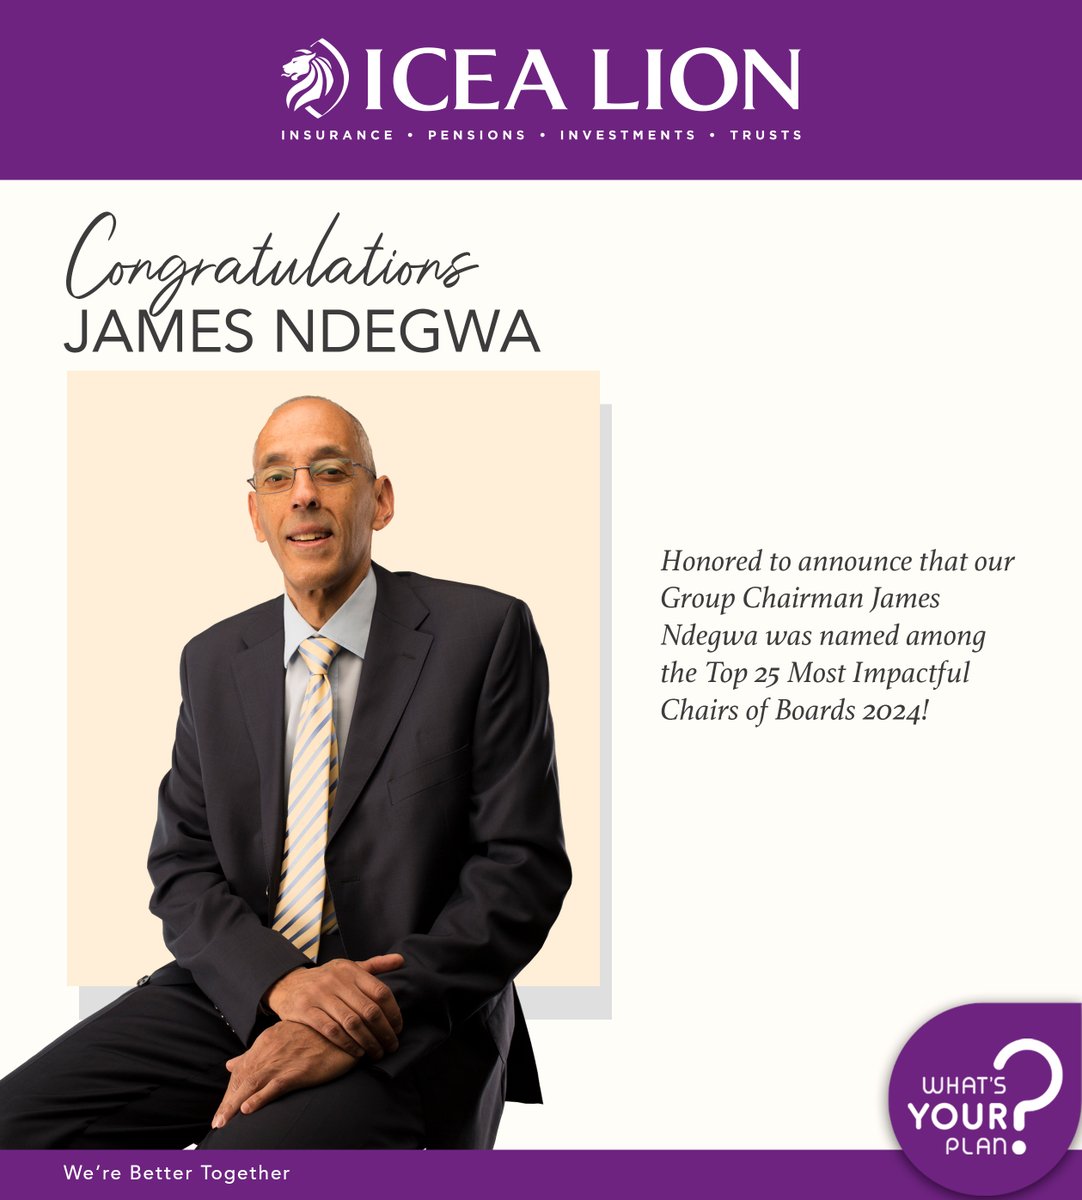 With his visionary leadership at NCBA Group PLC and ICEA LION Group, James has propelled us to extraordinary heights, earning recognition on a prestigious list! Join us in celebrating his profound impact on the corporate landscape! Read more here: tinyurl.com/ytduvc6x